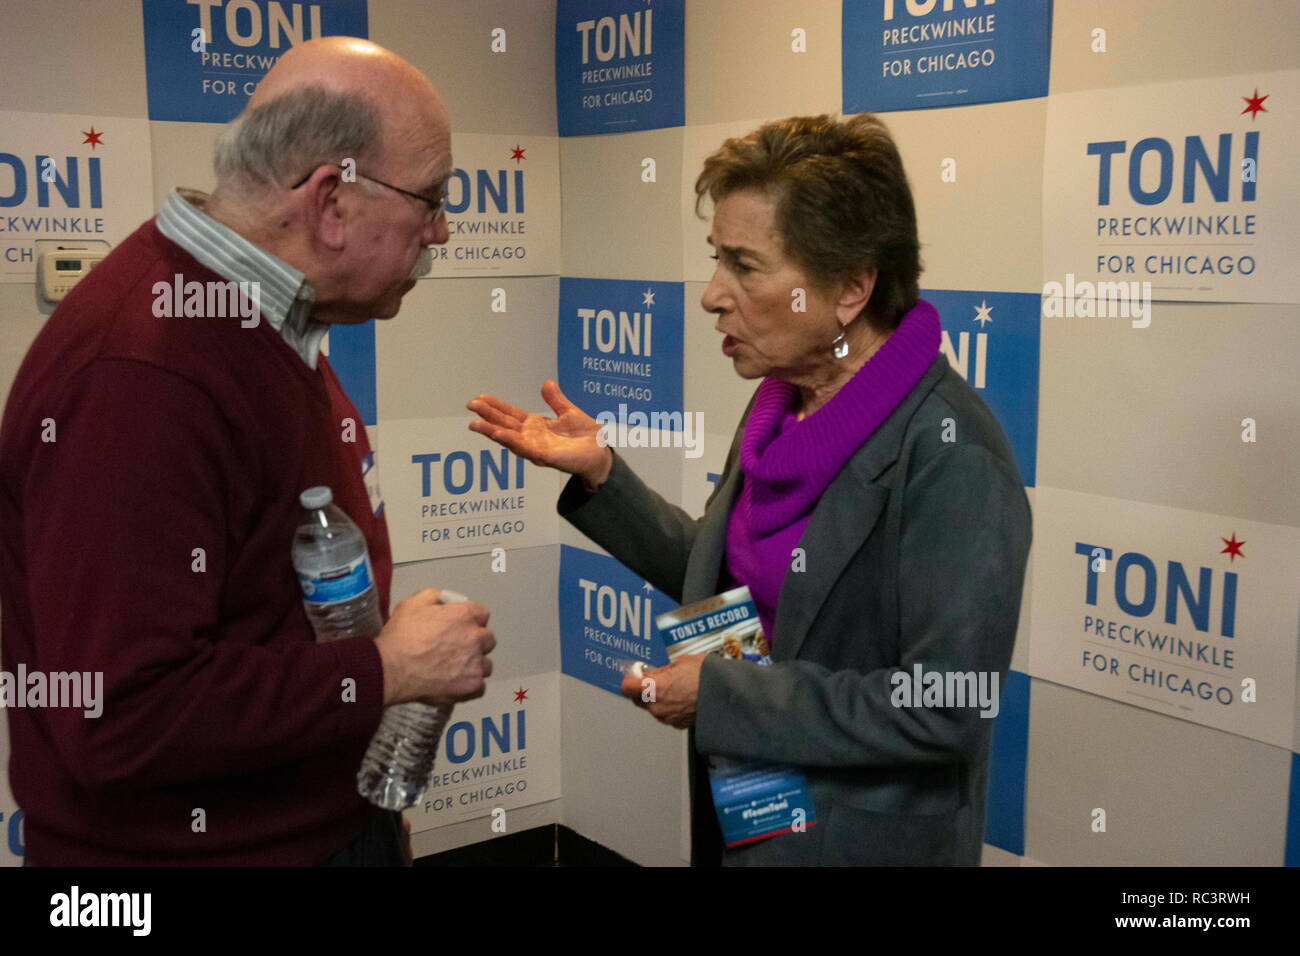 Chicago, Illinios, USA. 12th Jan, 2019. Jan Schakowski talks with a constituent at North side office opening of Chicago mayoral candidate Toni Preckwinkle. Credit: Karen I. Hirsch/ZUMA Wire/Alamy Live News Stock Photo